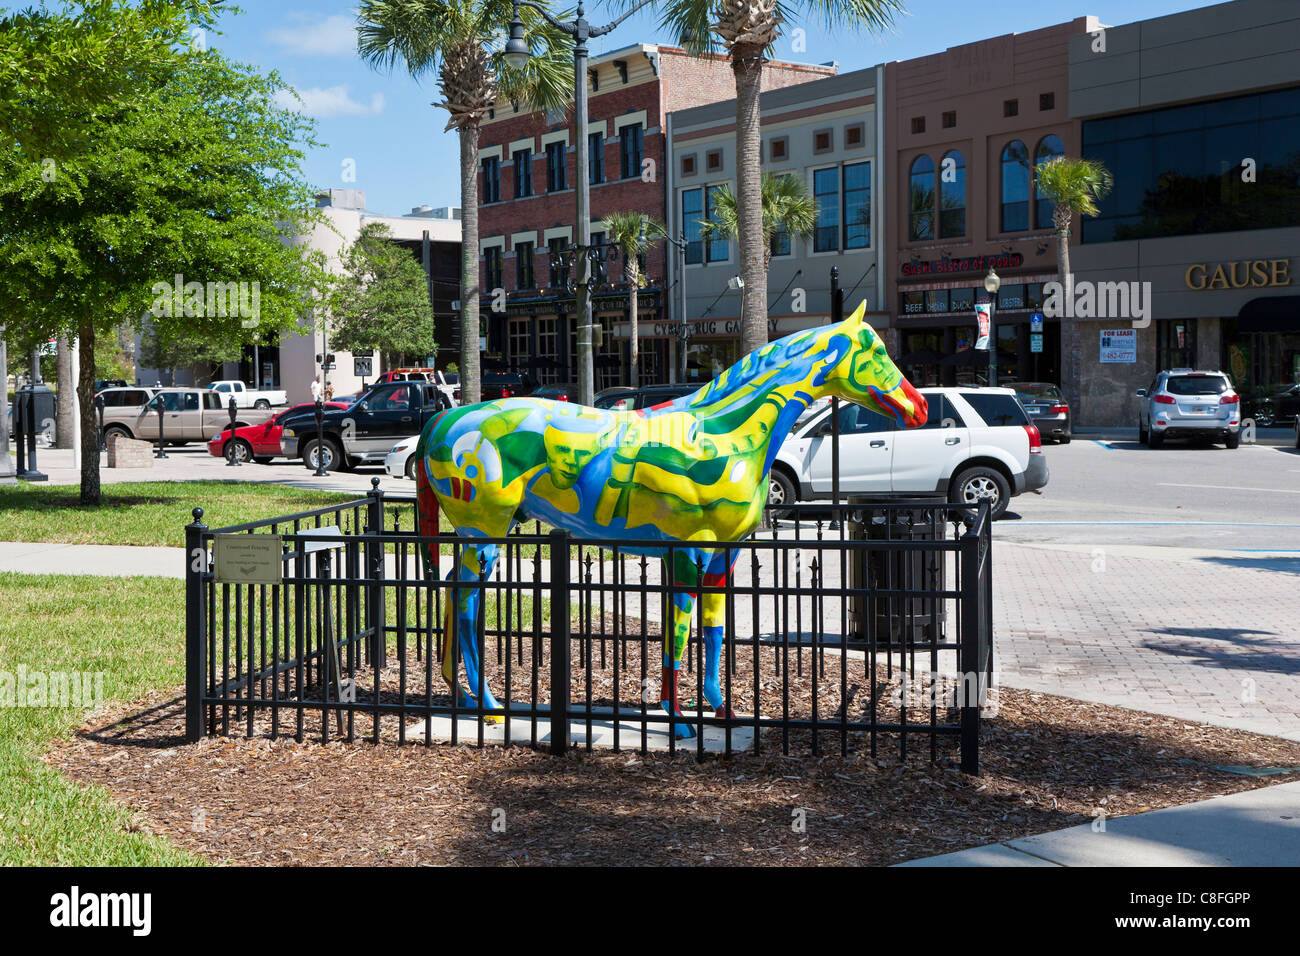 Horse Fever art project statue at the downtown square in Ocala, Florida Stock Photo